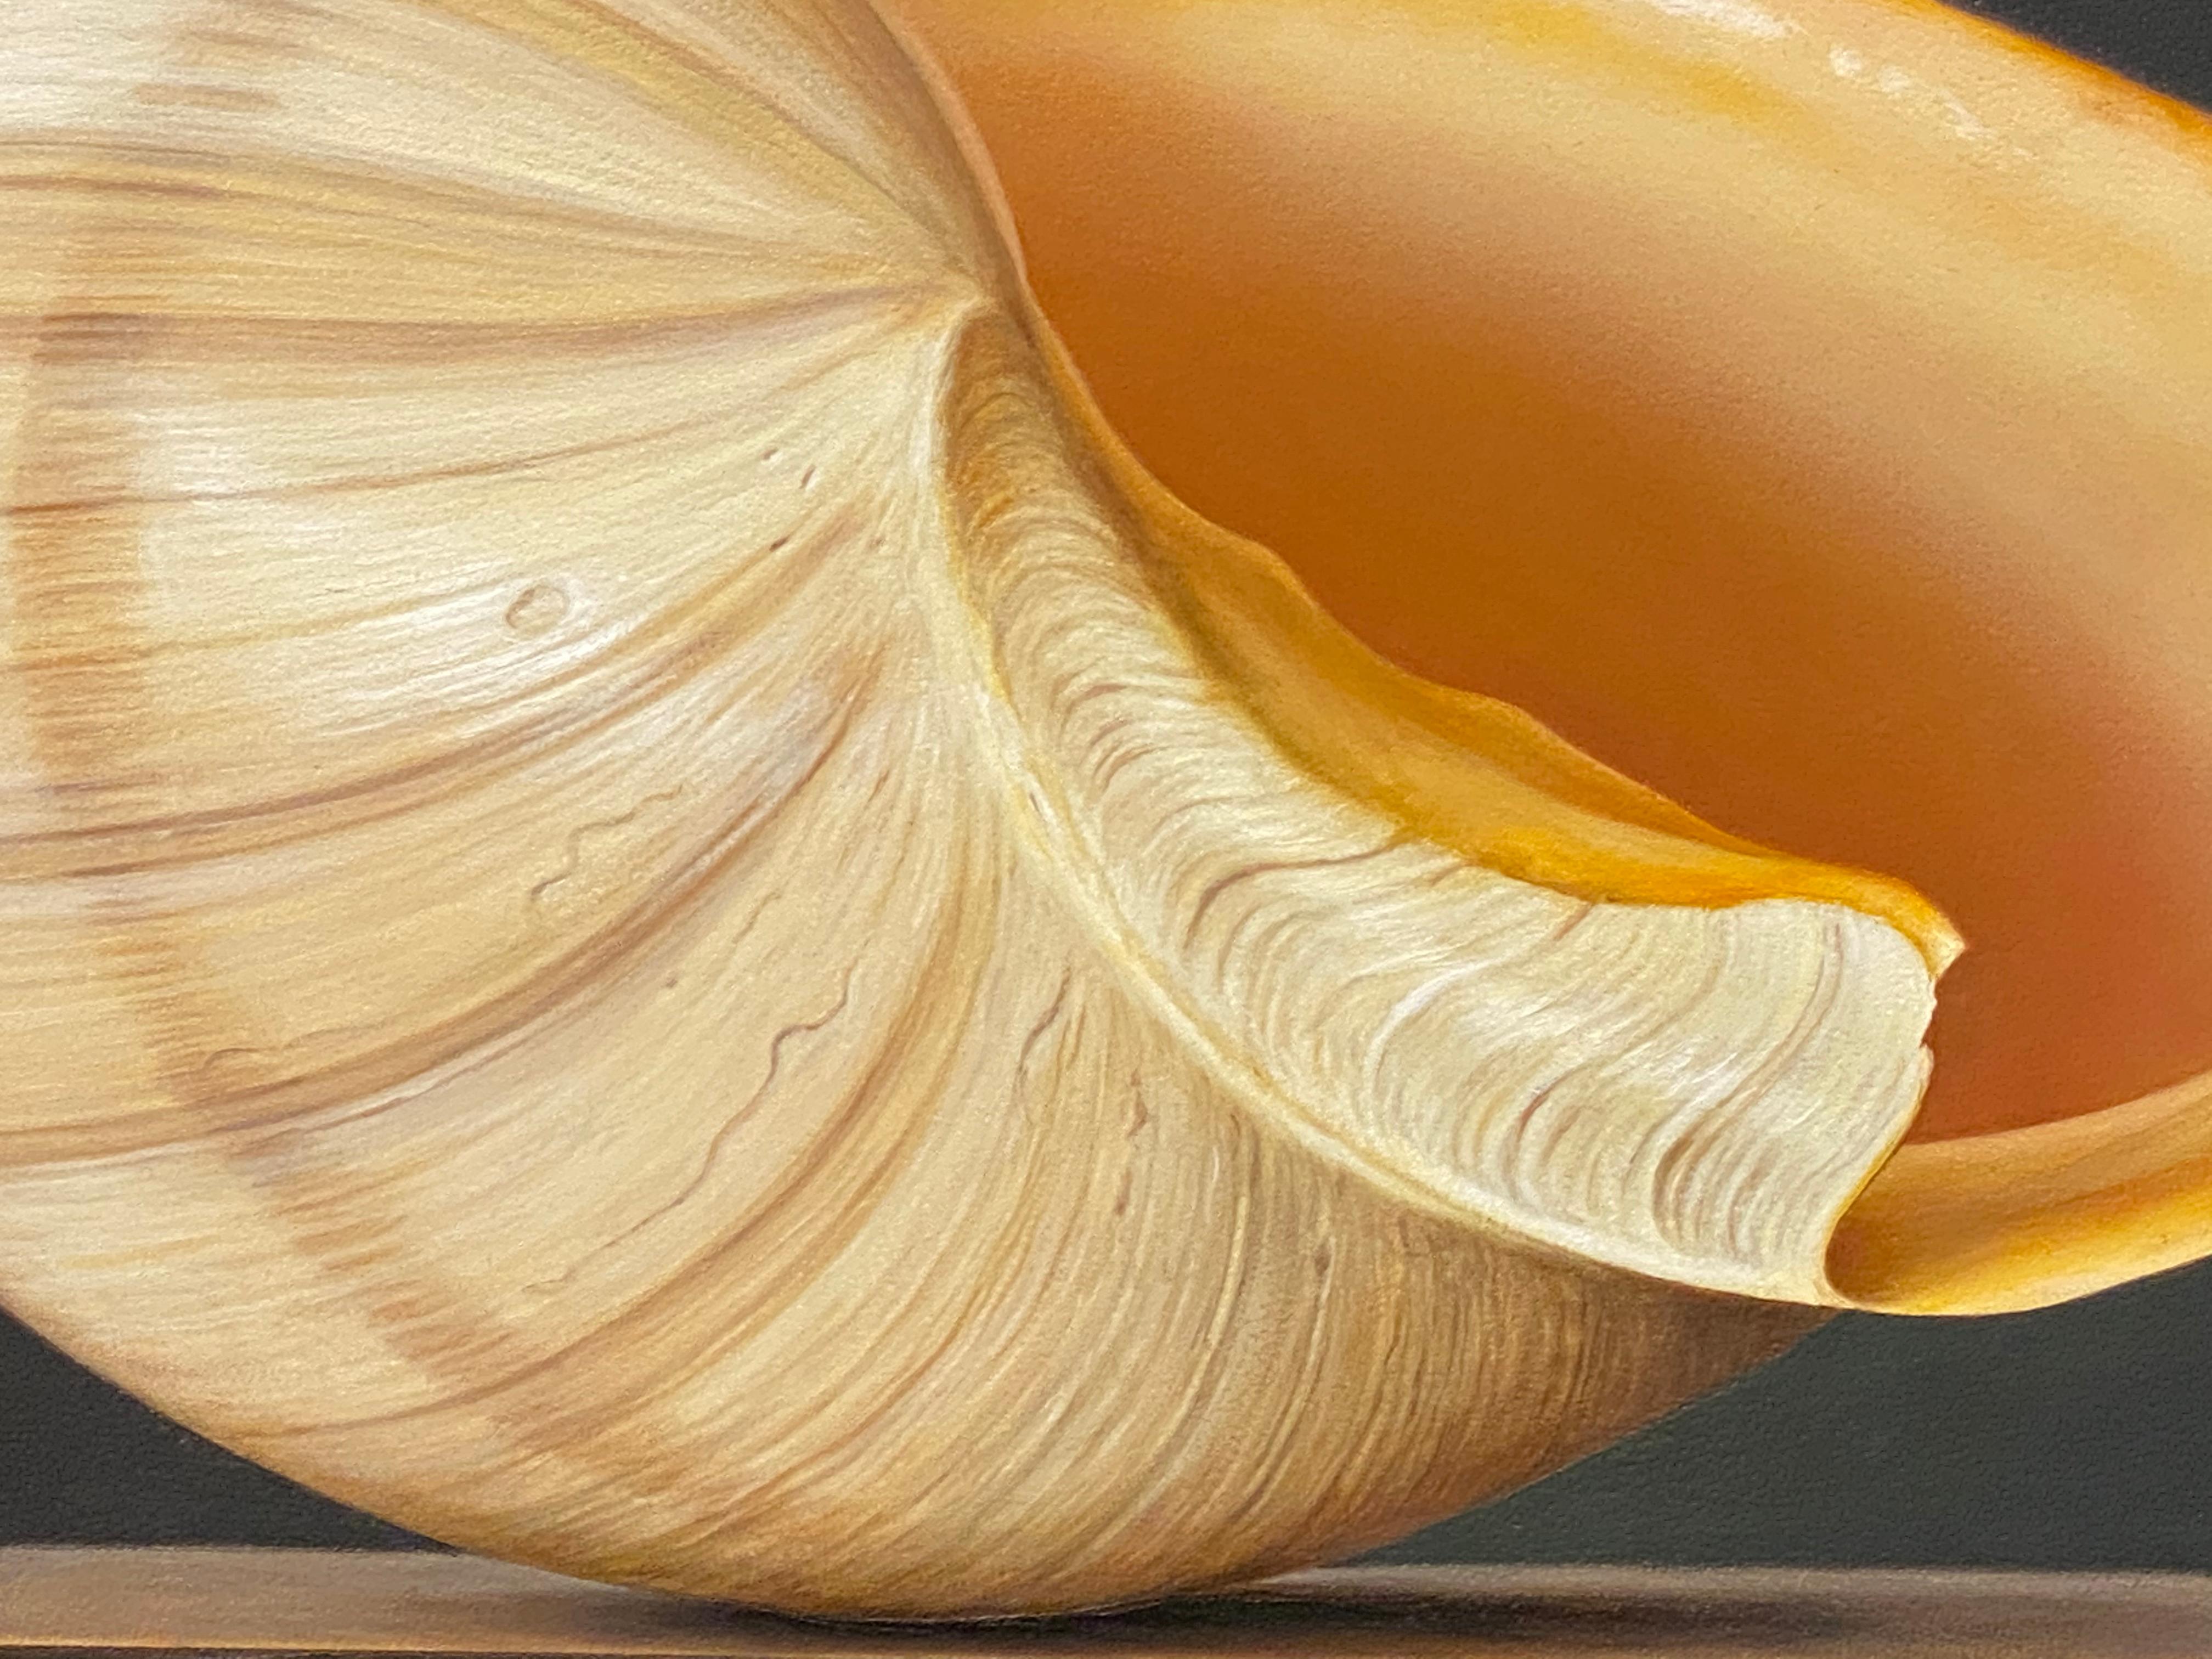 Shell (3) - 21st Century Hyper Realistic Still-life painting of a Shell  - Contemporary Painting by Bart Koning